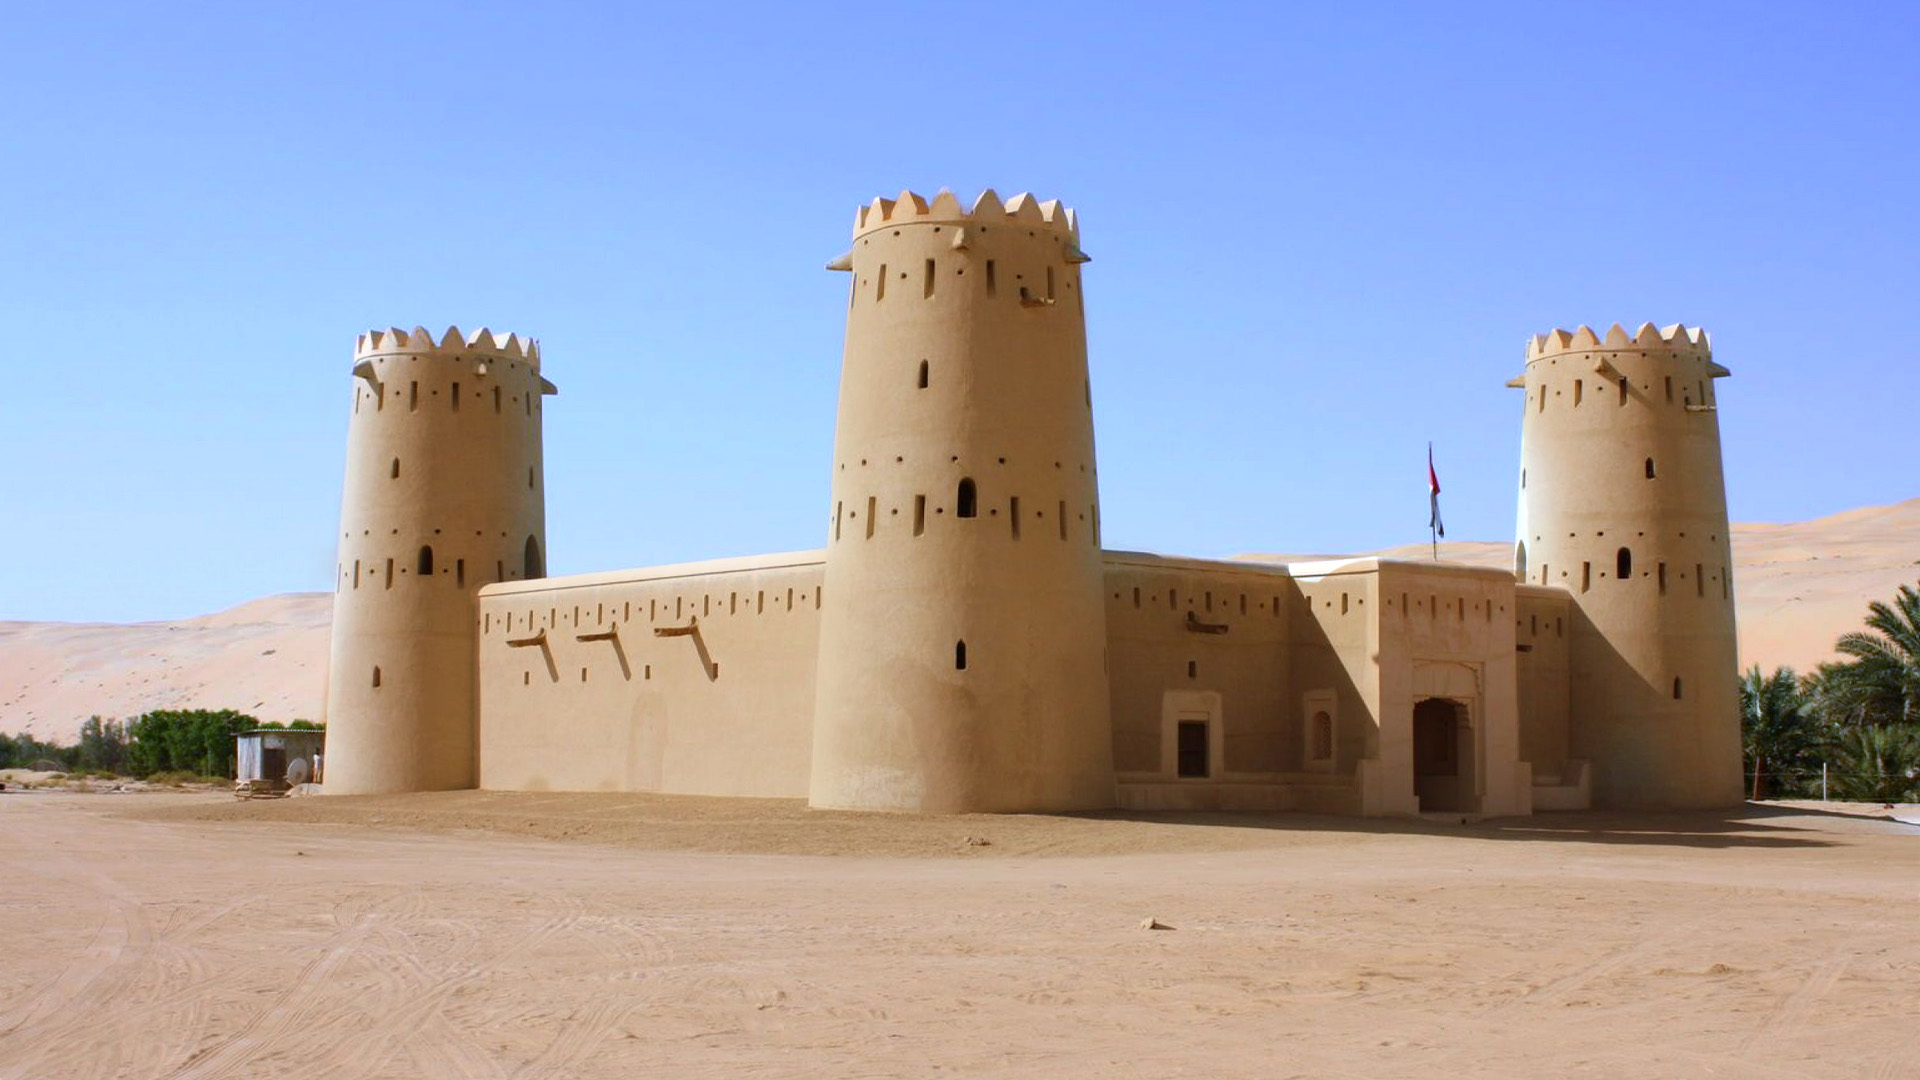 A panoramic photograph immortalizes the square-shaped Qasr Al-Harrana, one of the renowned desert castles, with the backdrop of a clear blue sky.